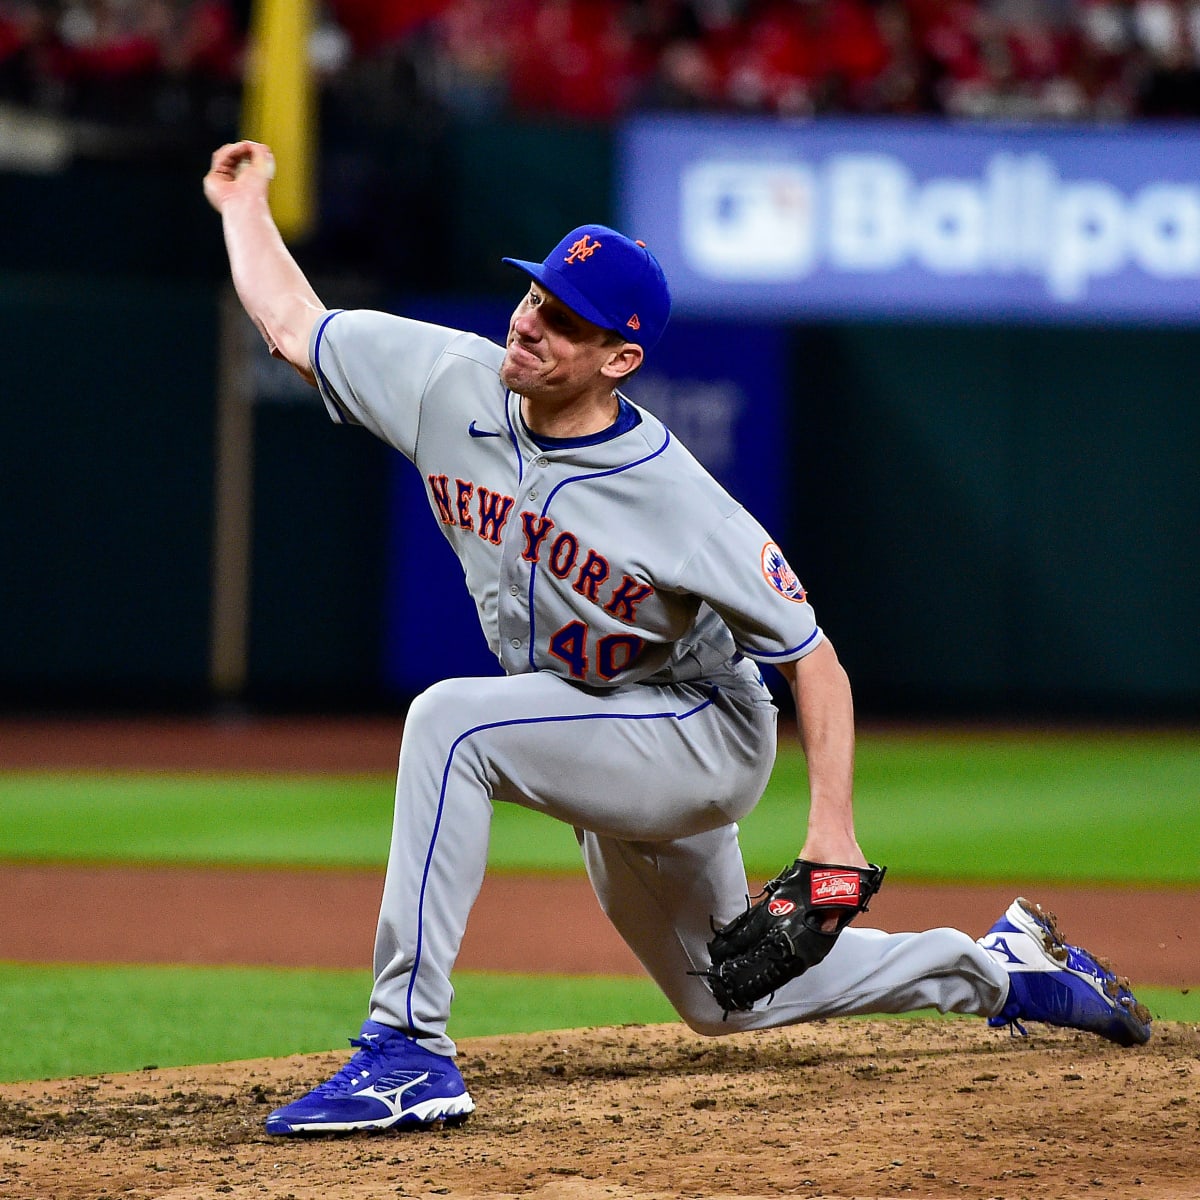 Chris Bassitt gives Mets rotation one of game's best pitchers